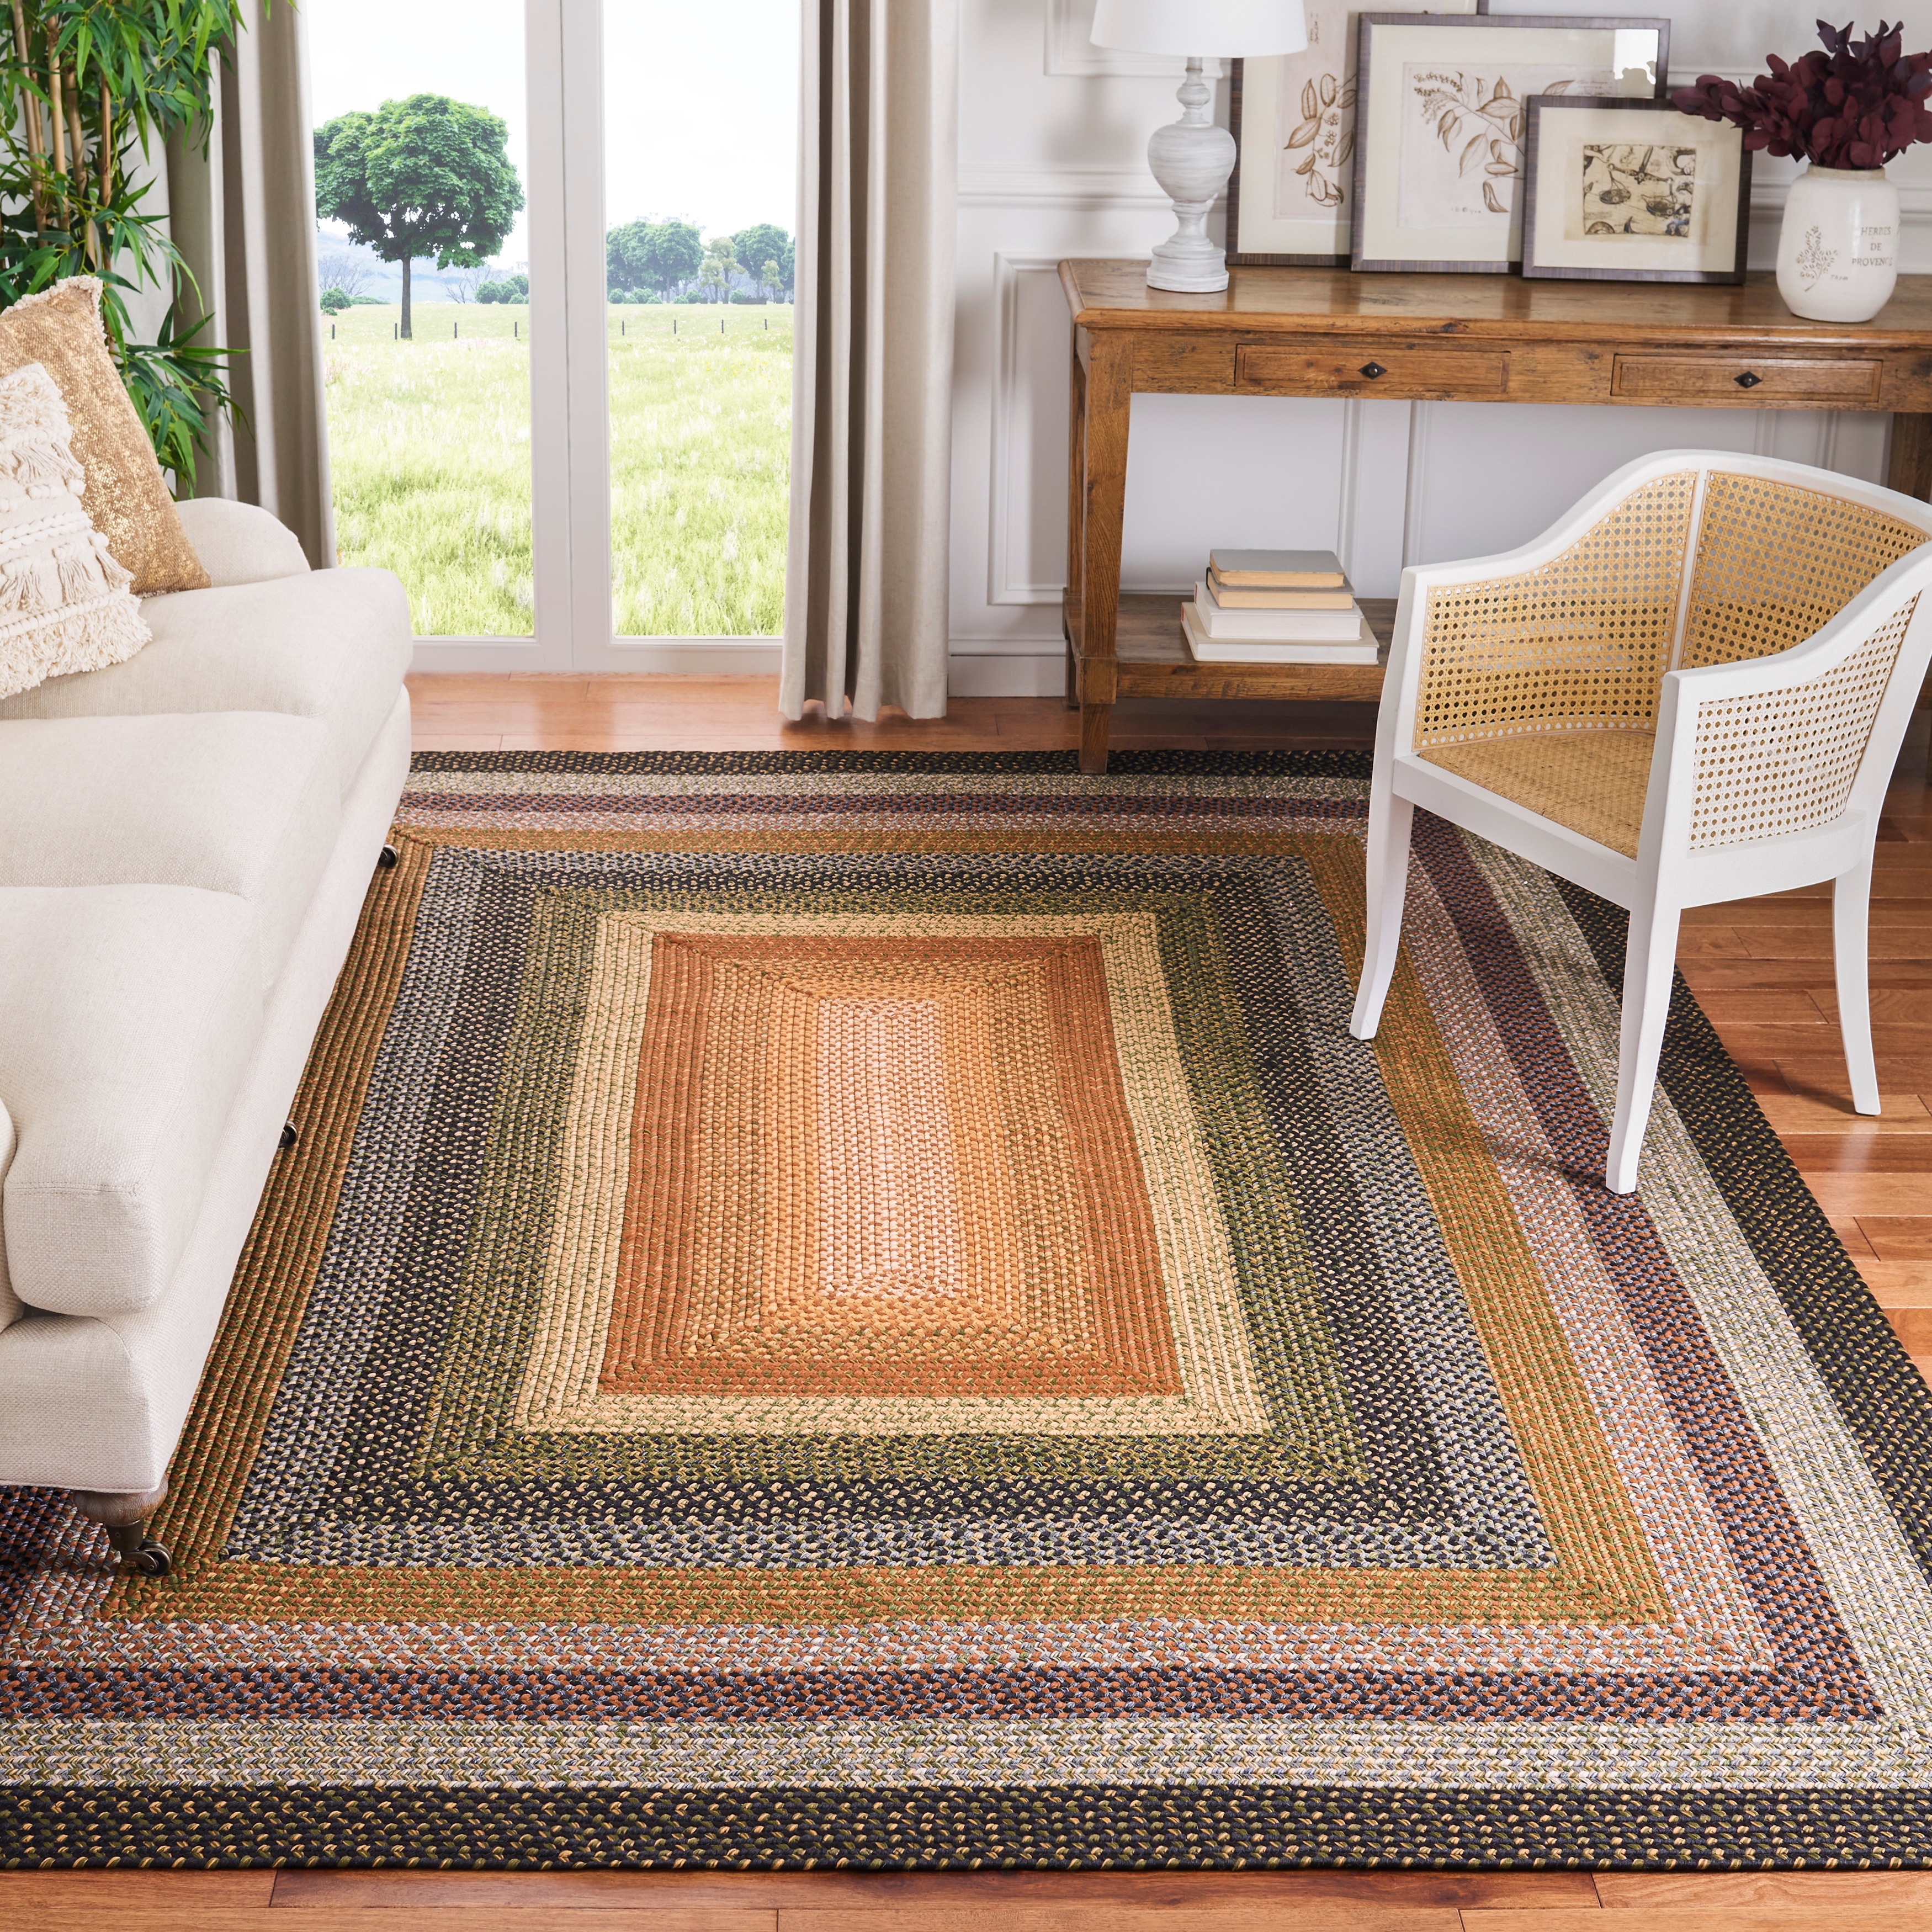 Oval Rug 100% Natural multicolor Handmade Reversible Rug Braided style Area  Rugs